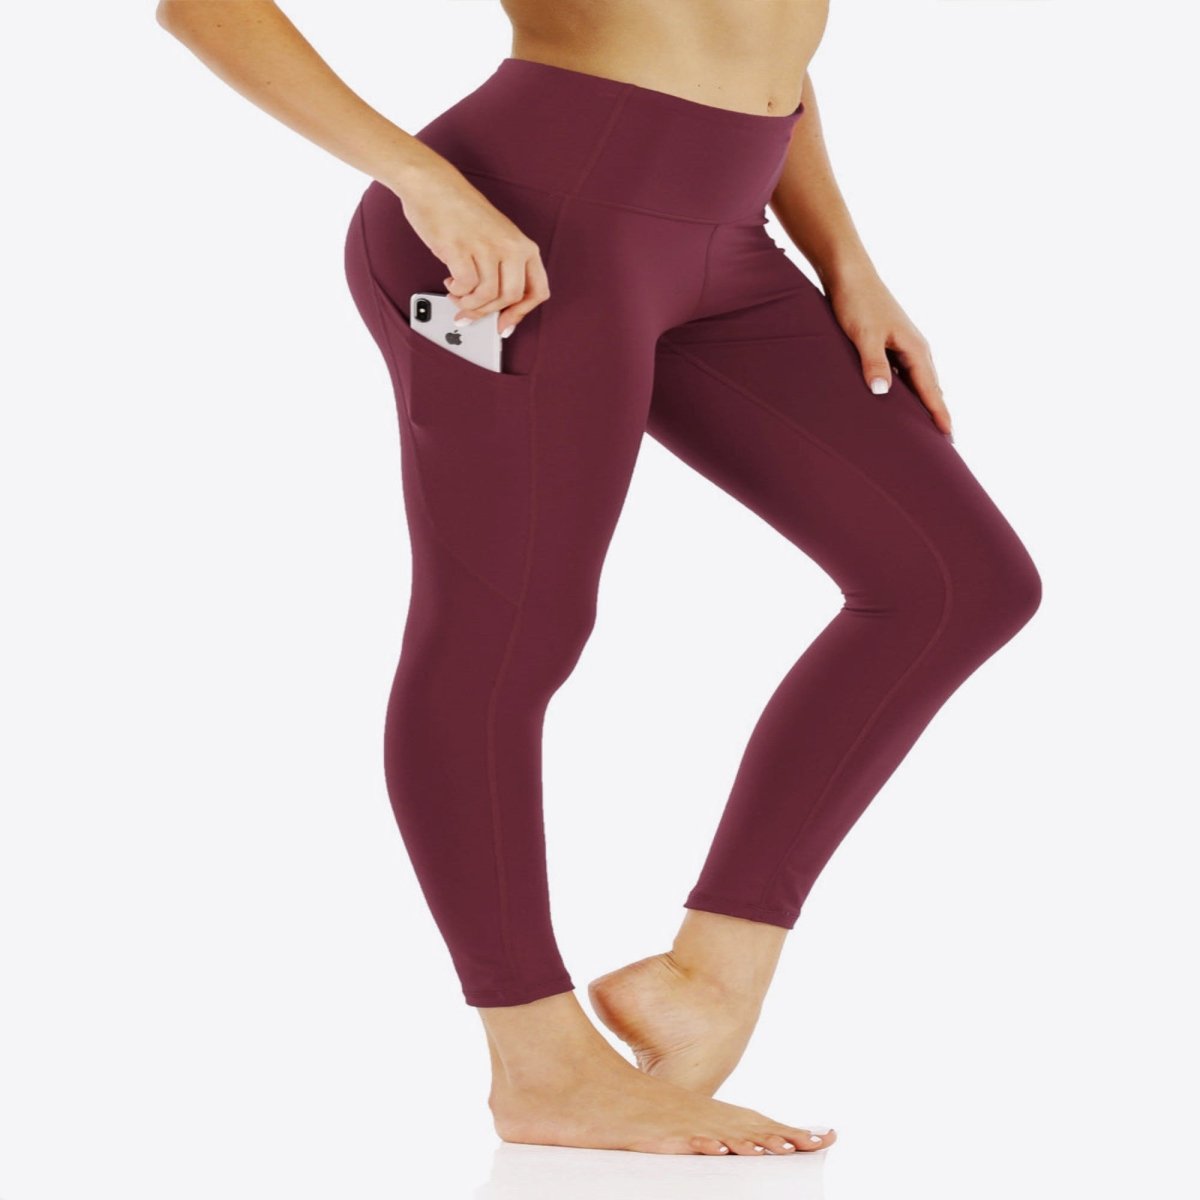 Wide Waistband Sports Leggings with Side Pockets - worldclasscostumes